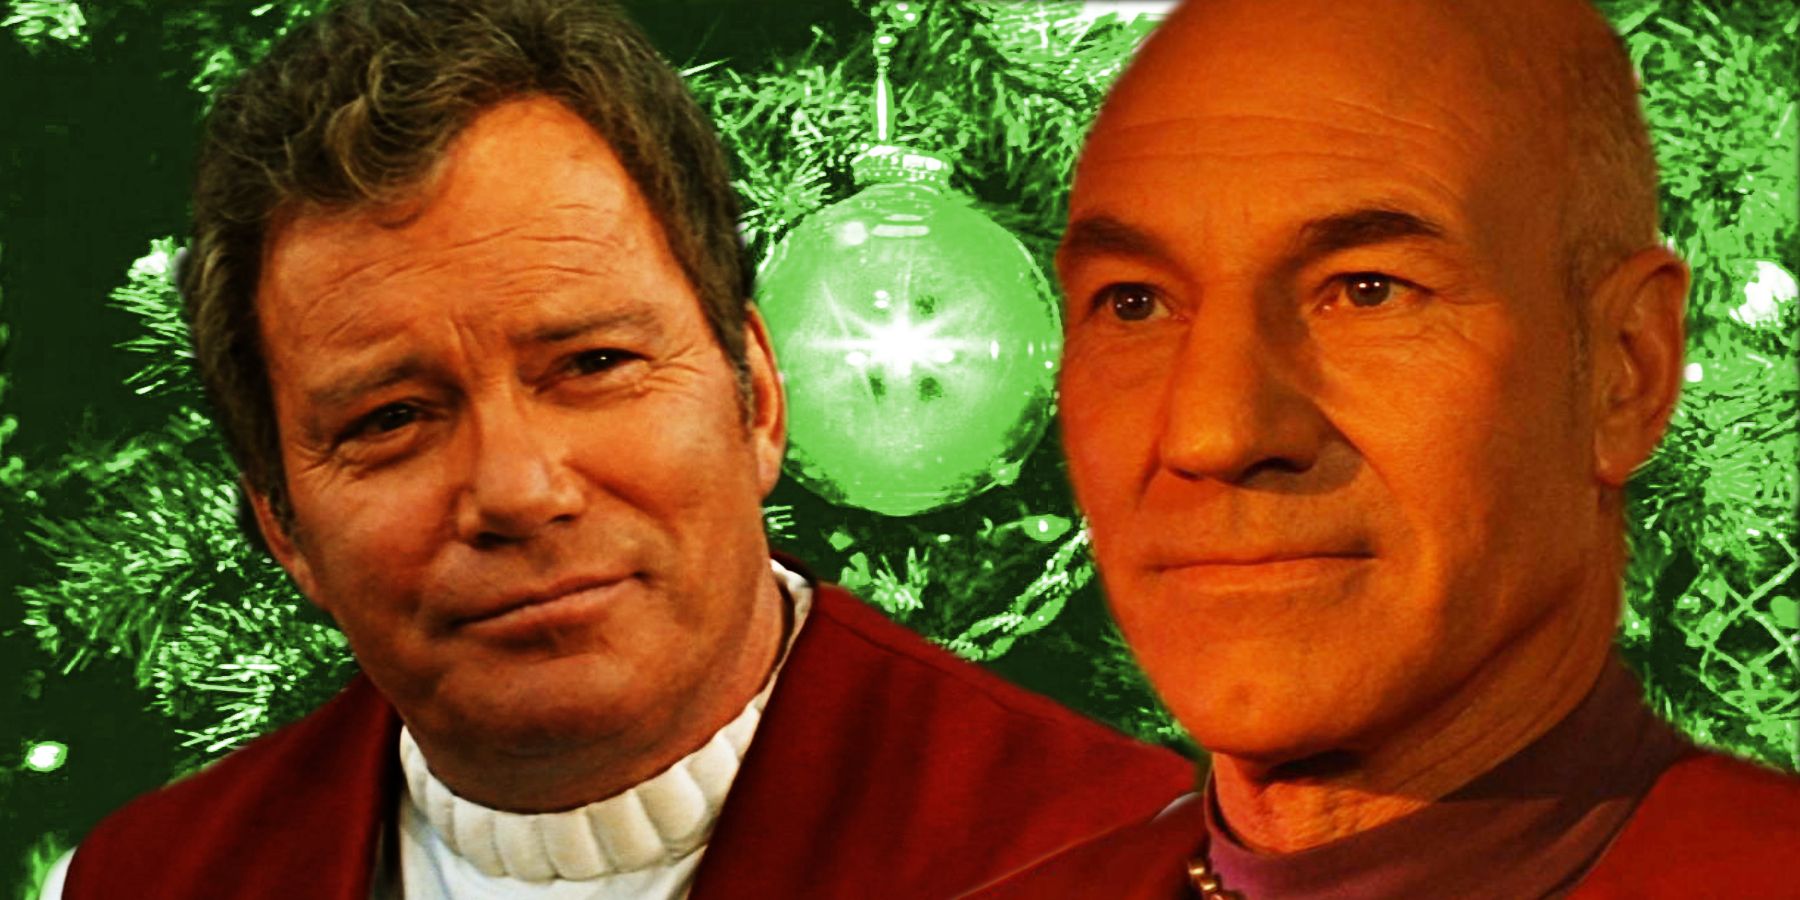 Kirk and Picard in front of the Christmas tree from Star Trek Generations